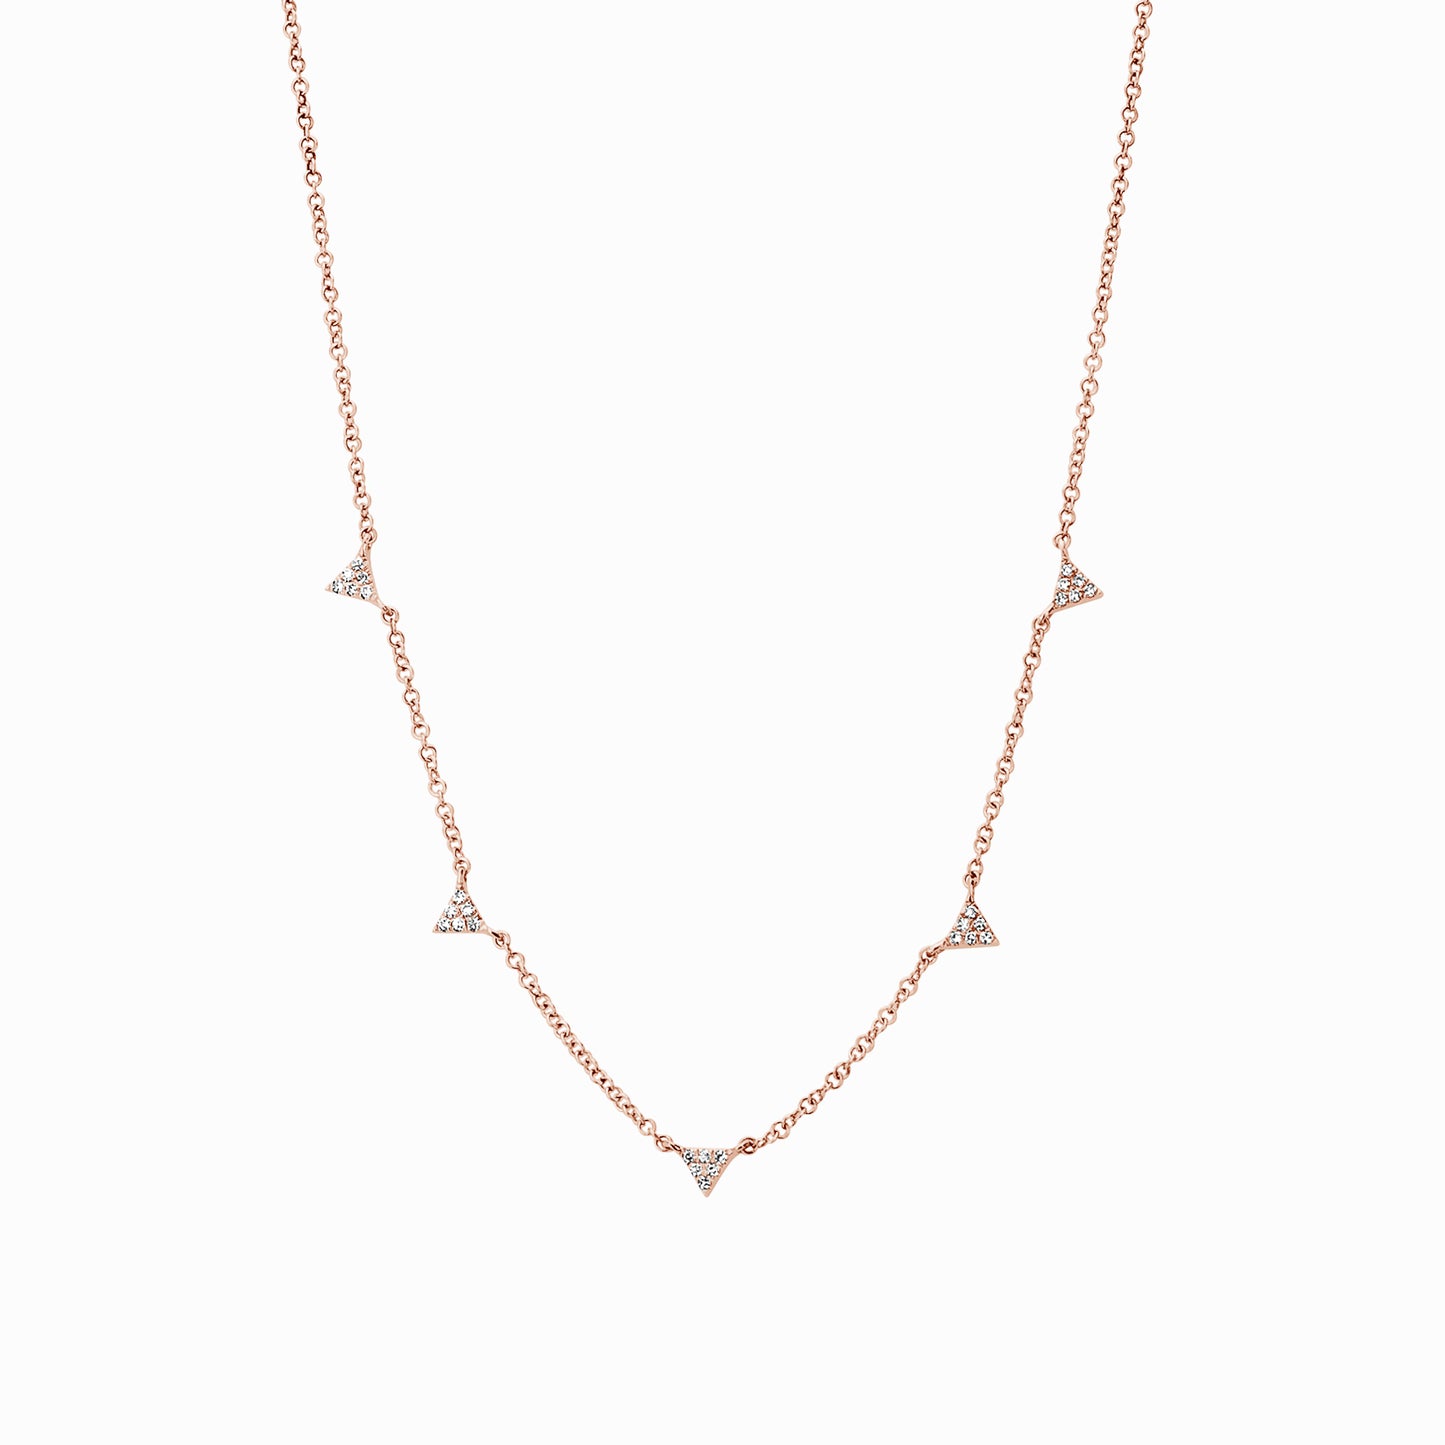 5 Station Diamond Triangle Chain Necklace